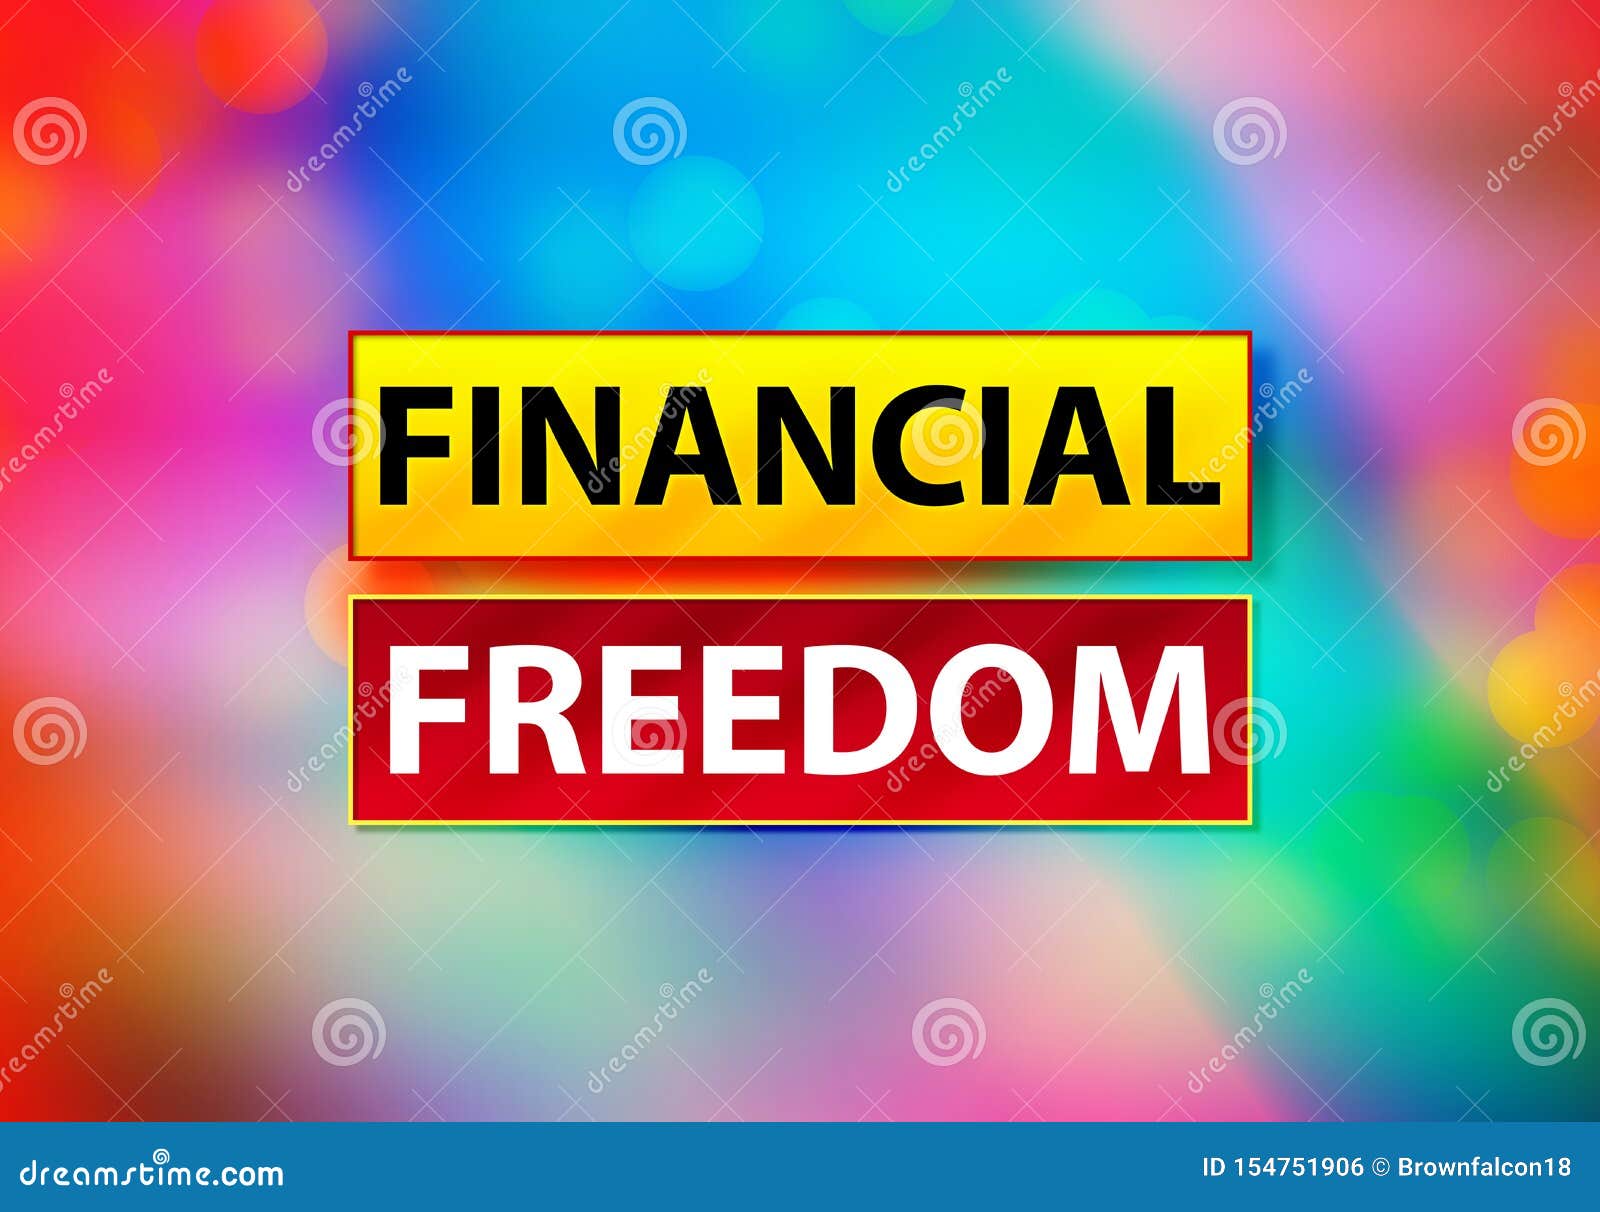 Financial Freedom Abstract Colorful Background Bokeh Design ...